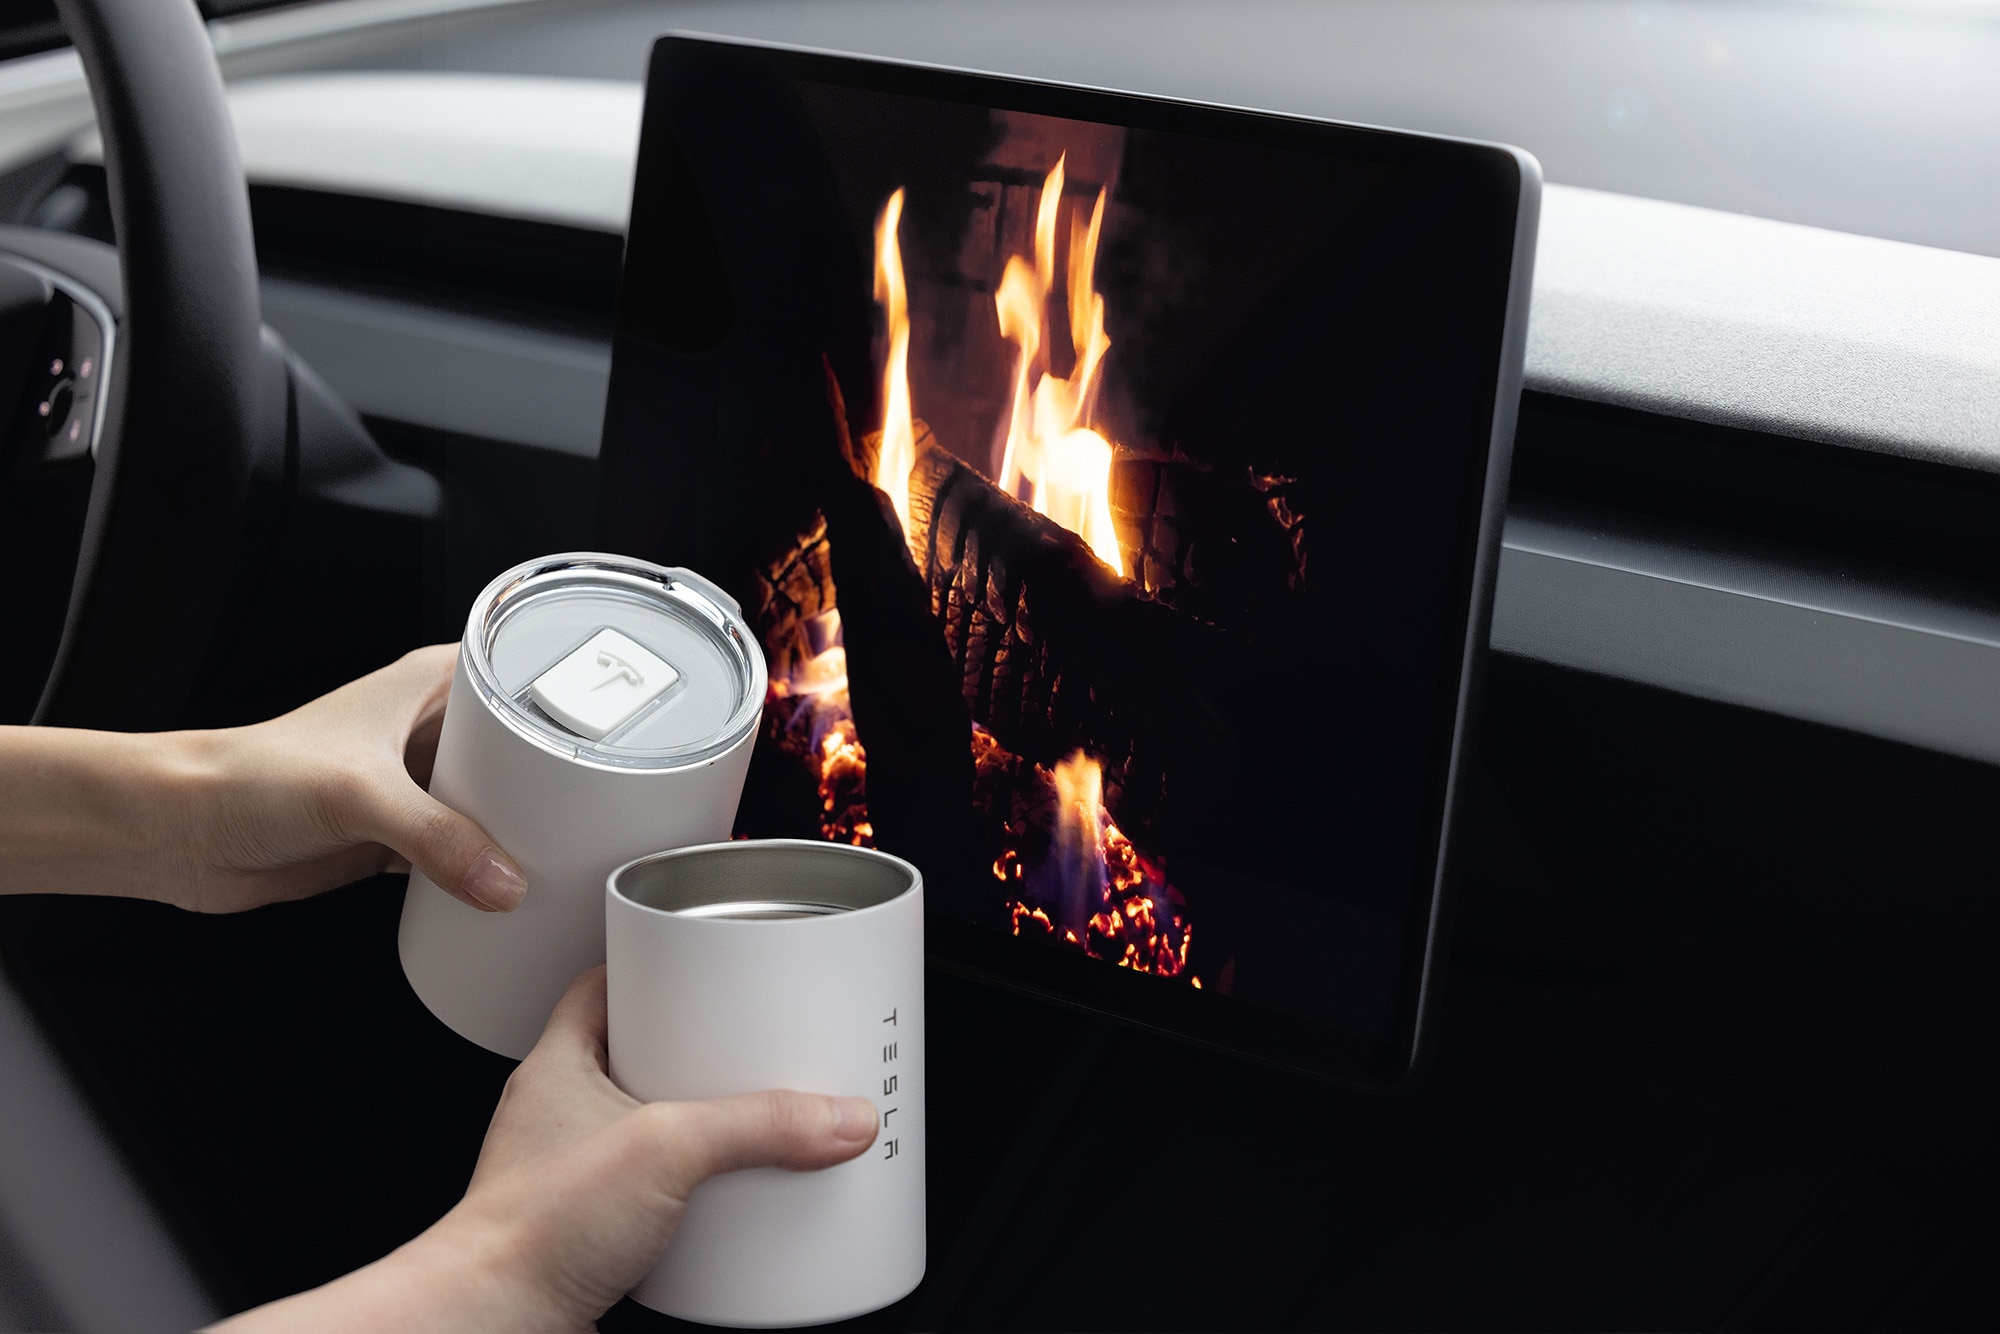 Hands toasting Tesla insulated beverage mugs in front of Romance Mode's fireplace display